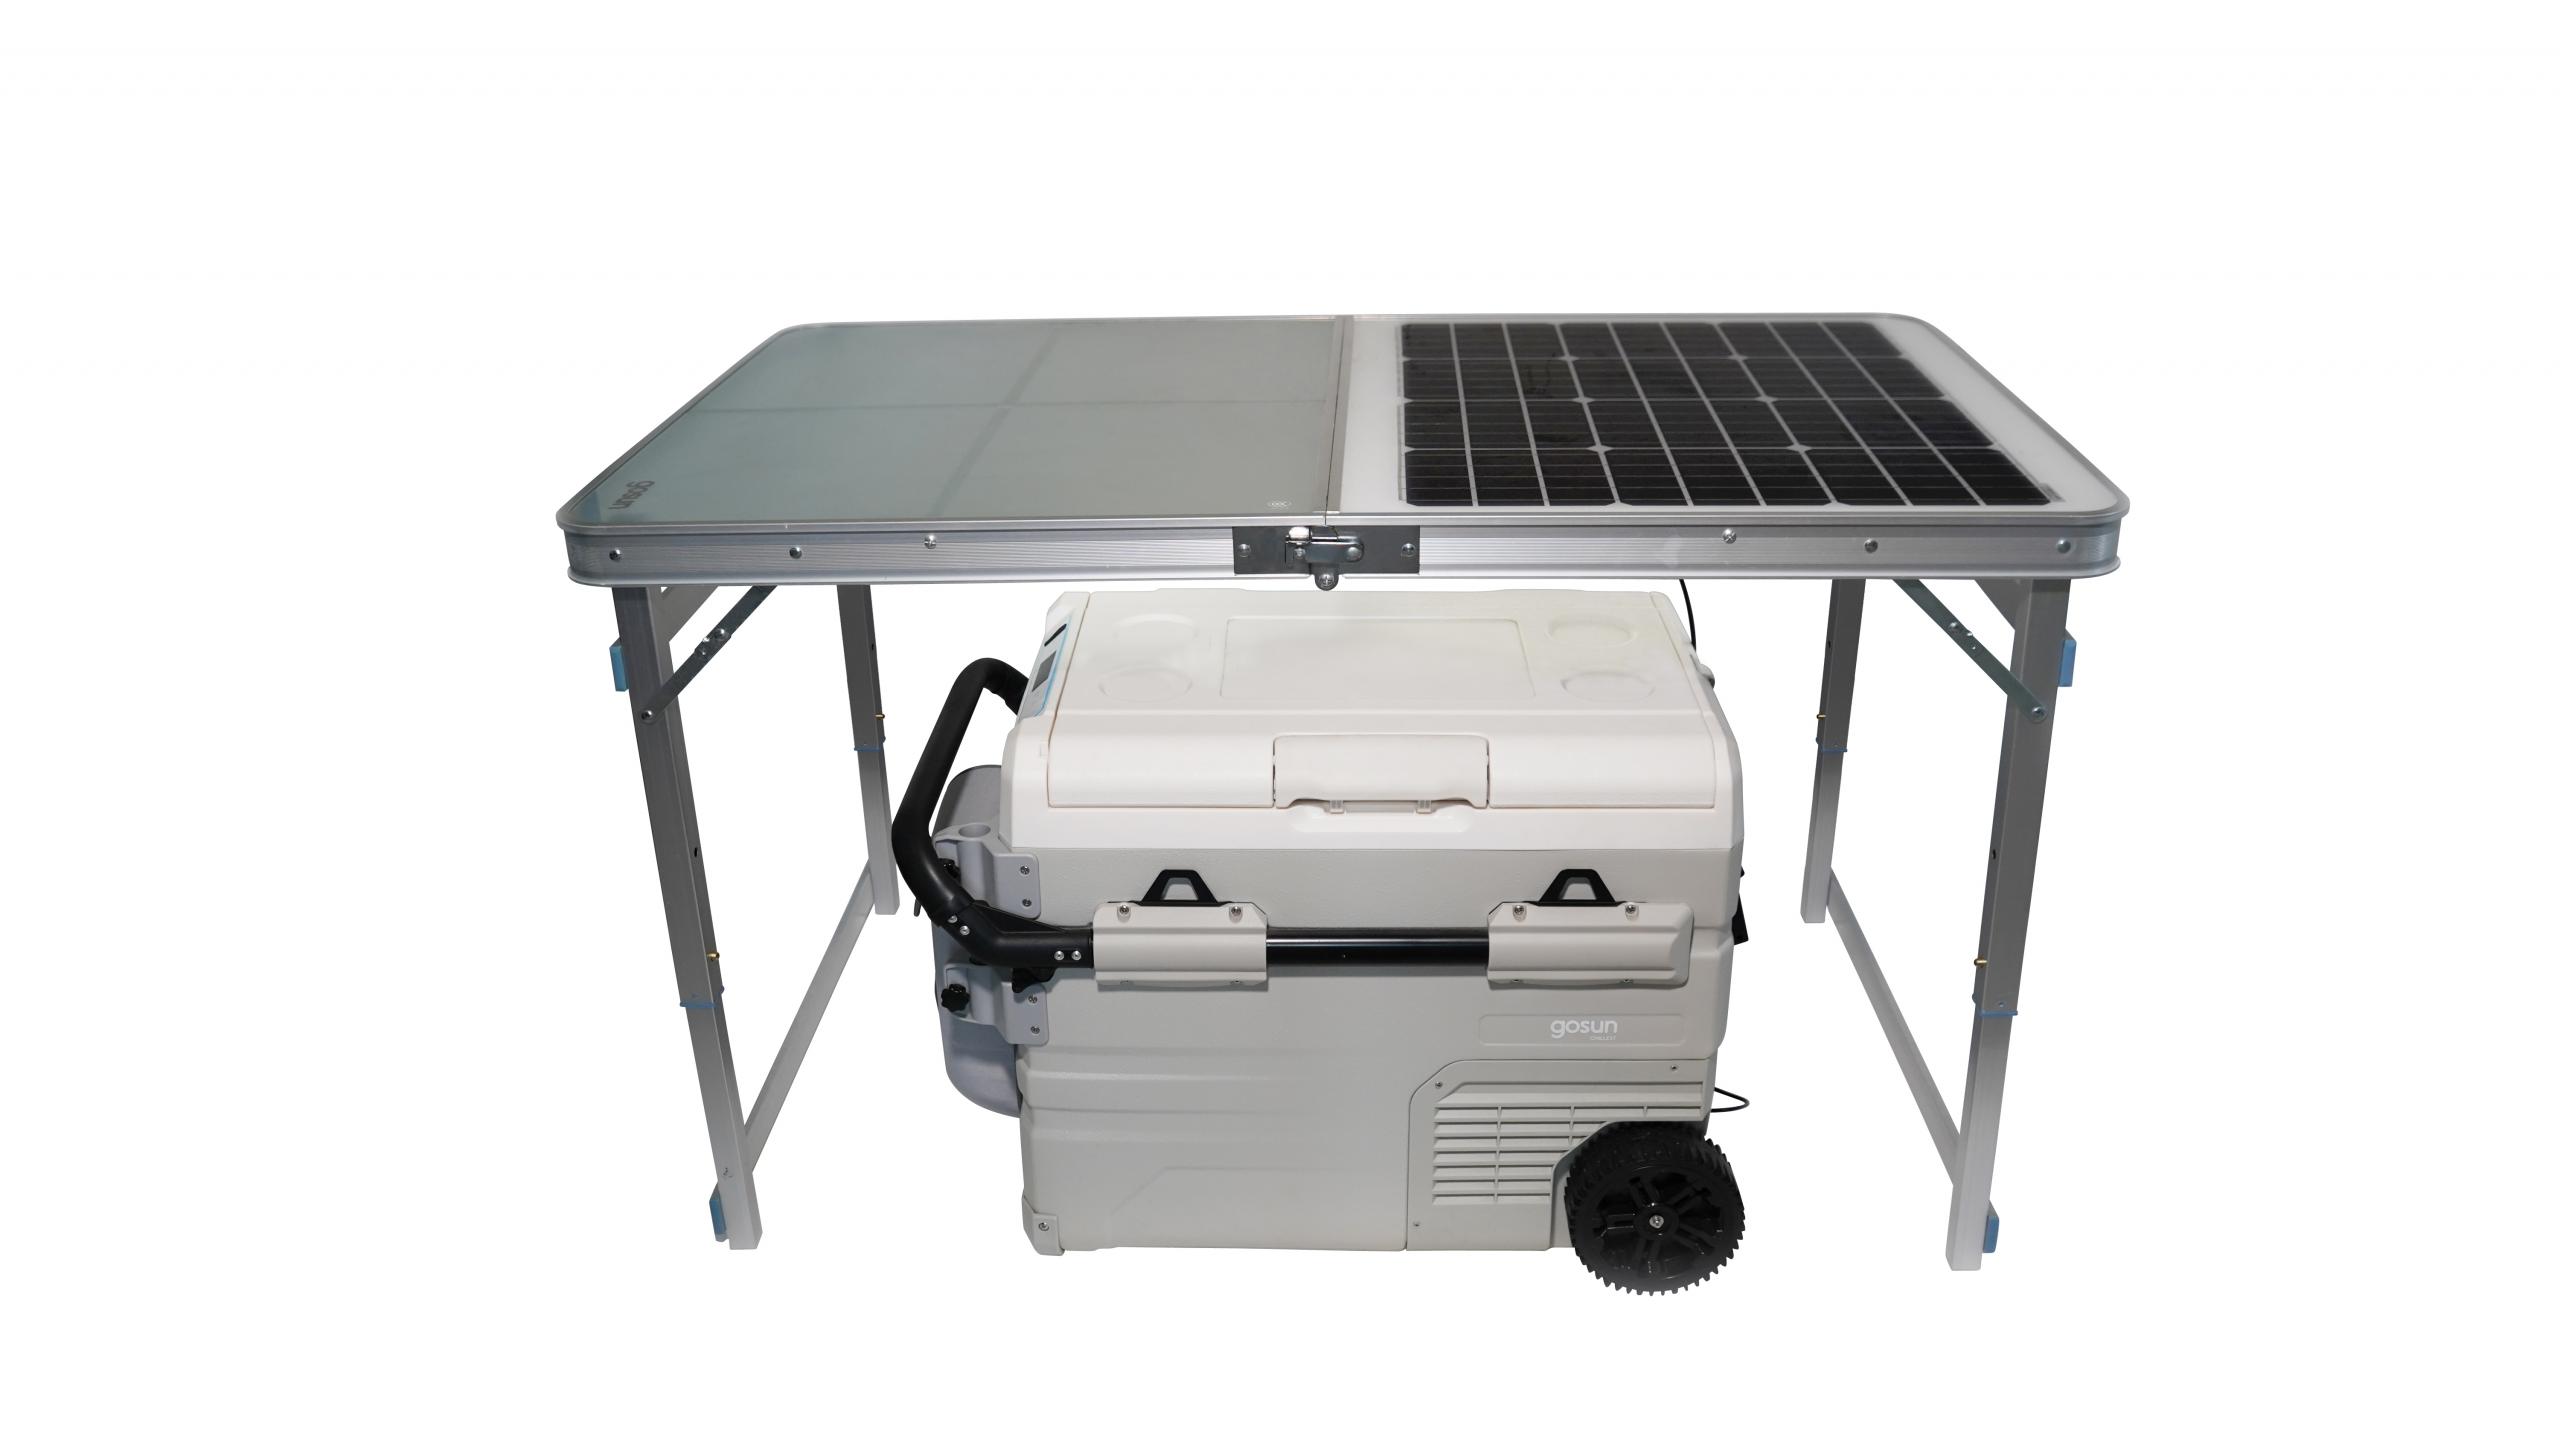 Mini-Fridge With Built-In Solar Panel & Battery Pack Is Perfect For RVs & Cars